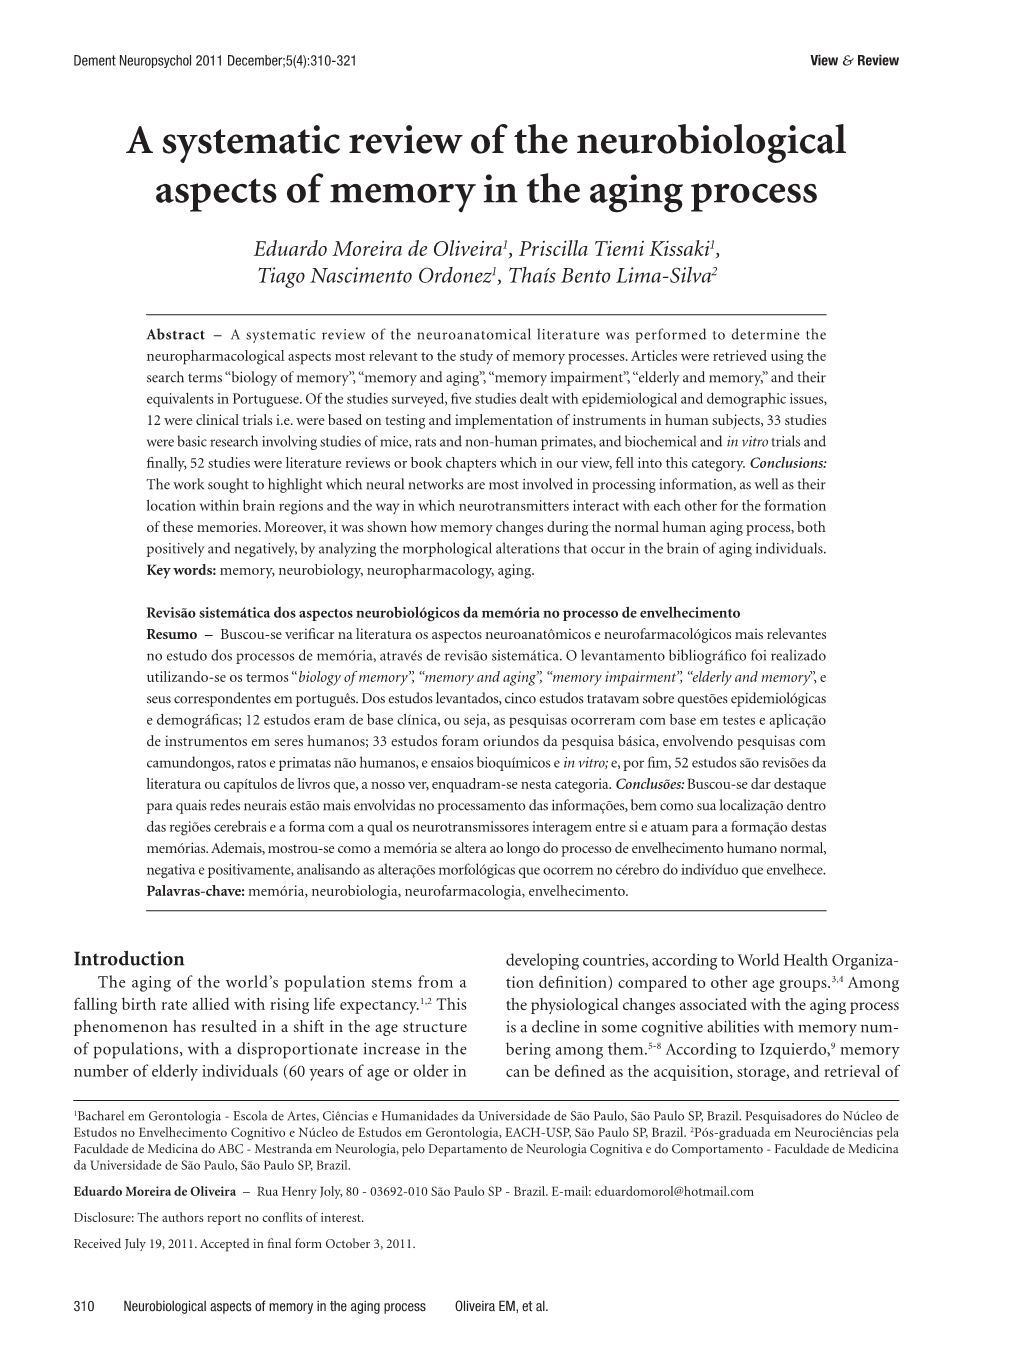 A Systematic Review of the Neurobiological Aspects of Memory in the Aging Process